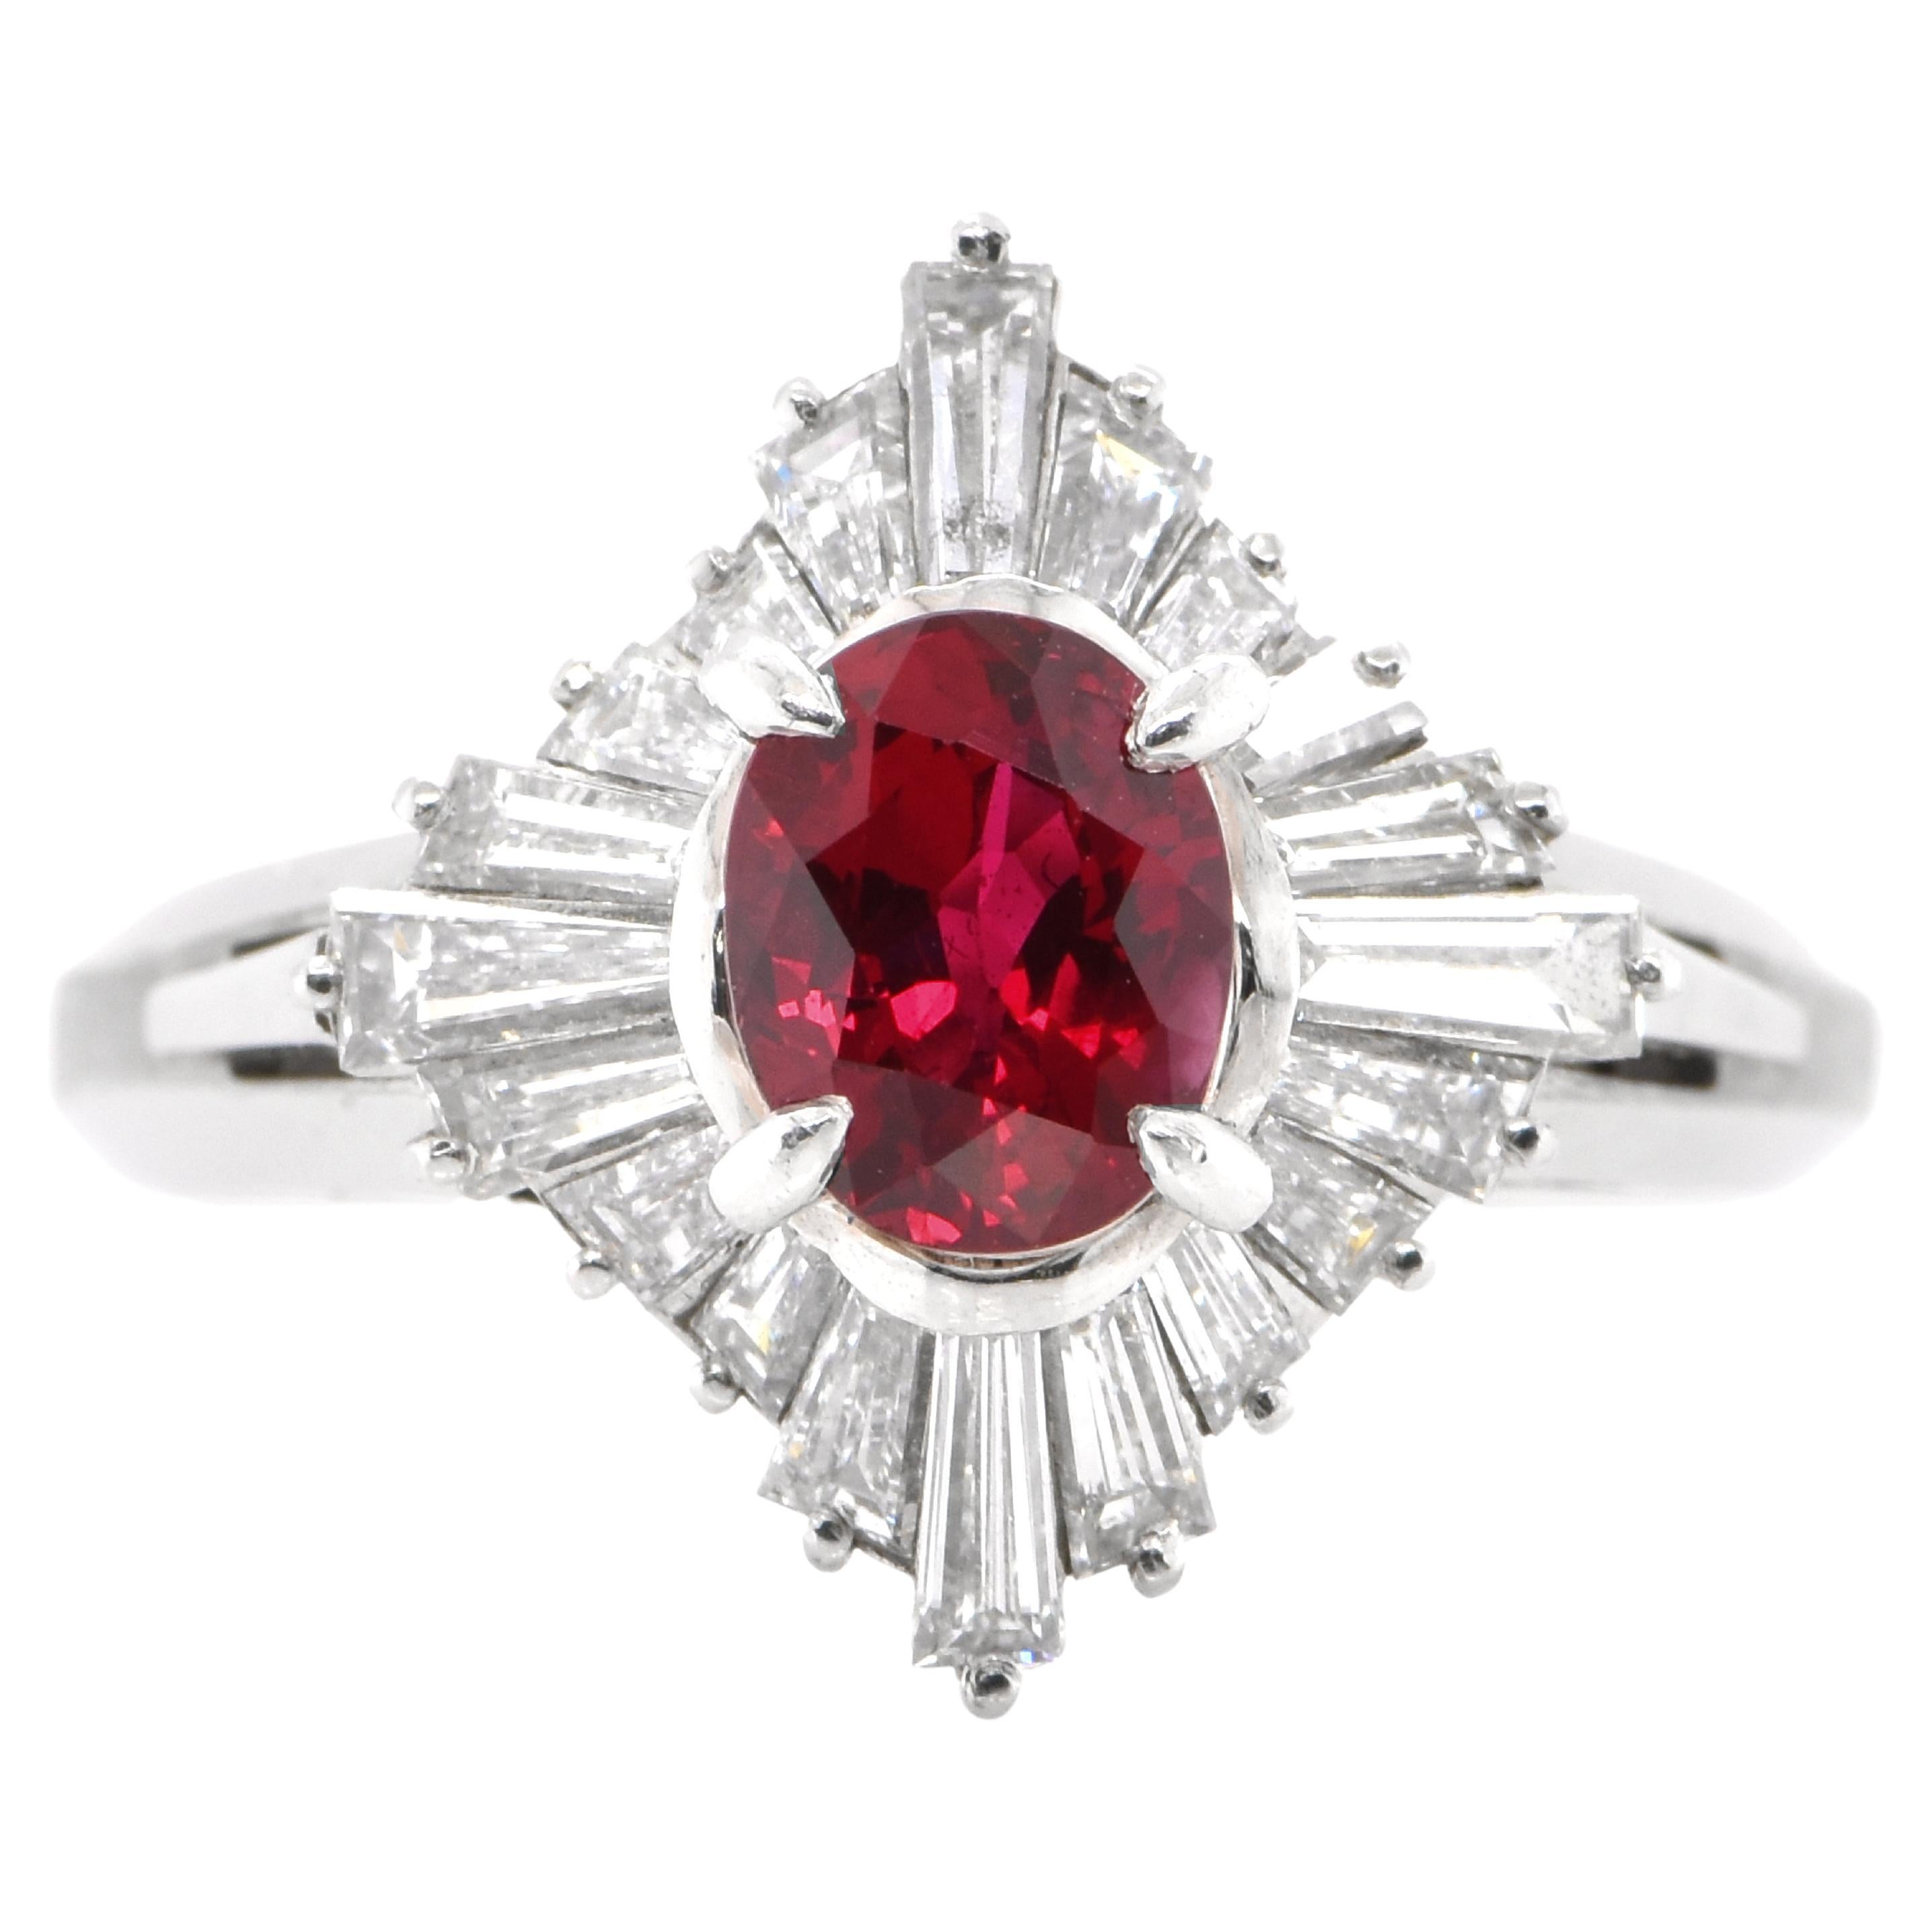 1.15 Carat Natural Blood Red Ruby and Diamond Vintage Ring Set in Platinum